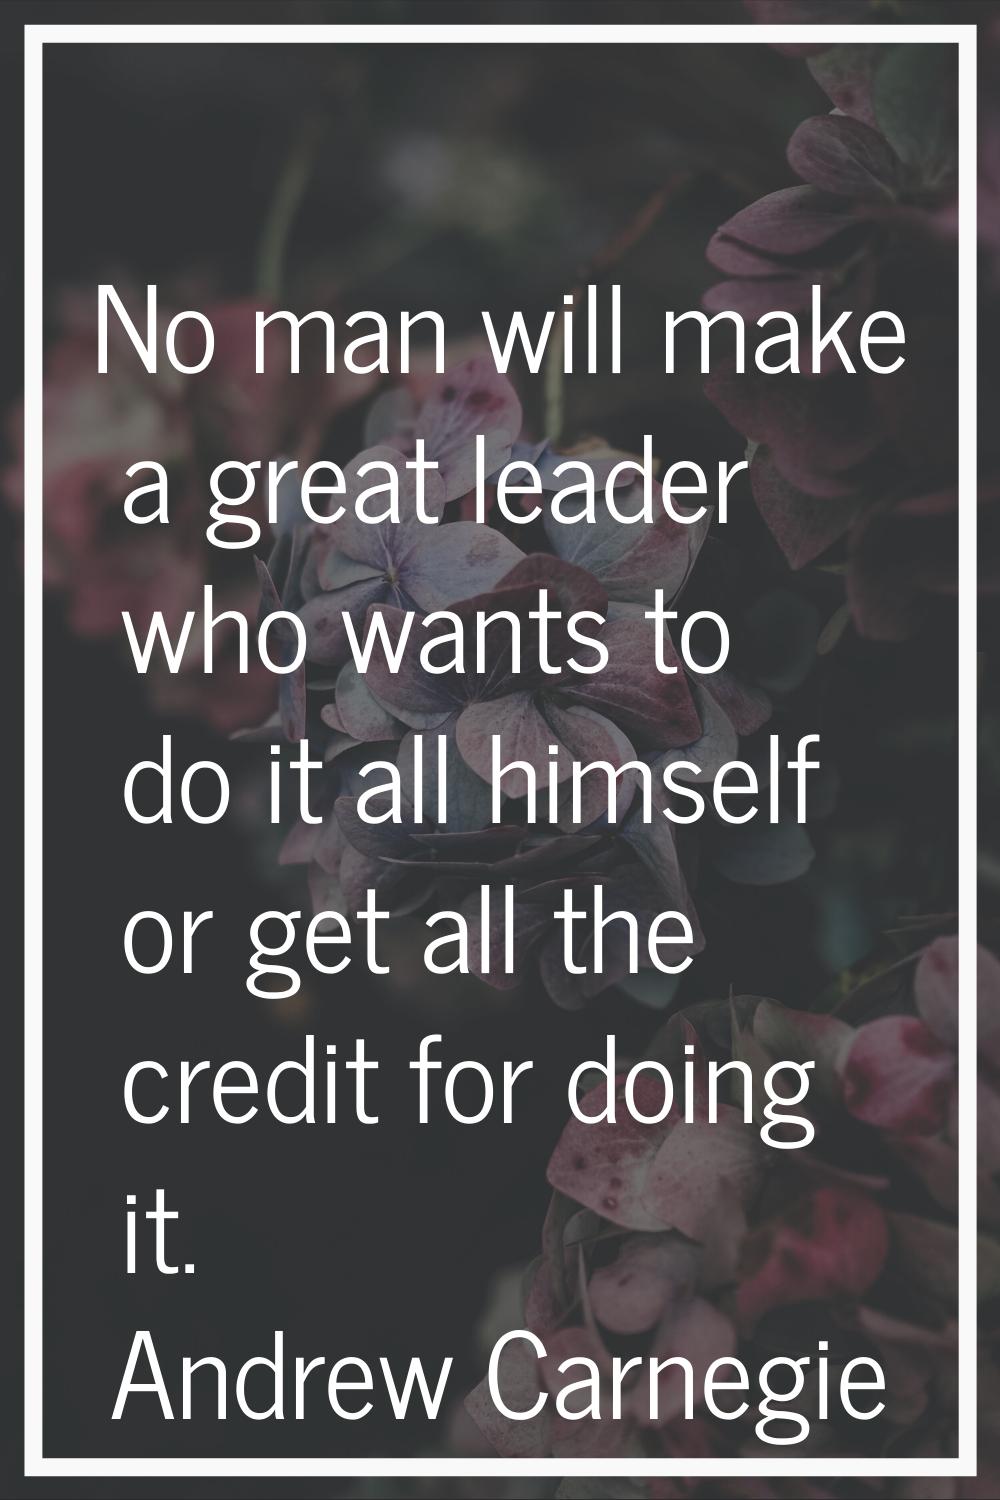 No man will make a great leader who wants to do it all himself or get all the credit for doing it.